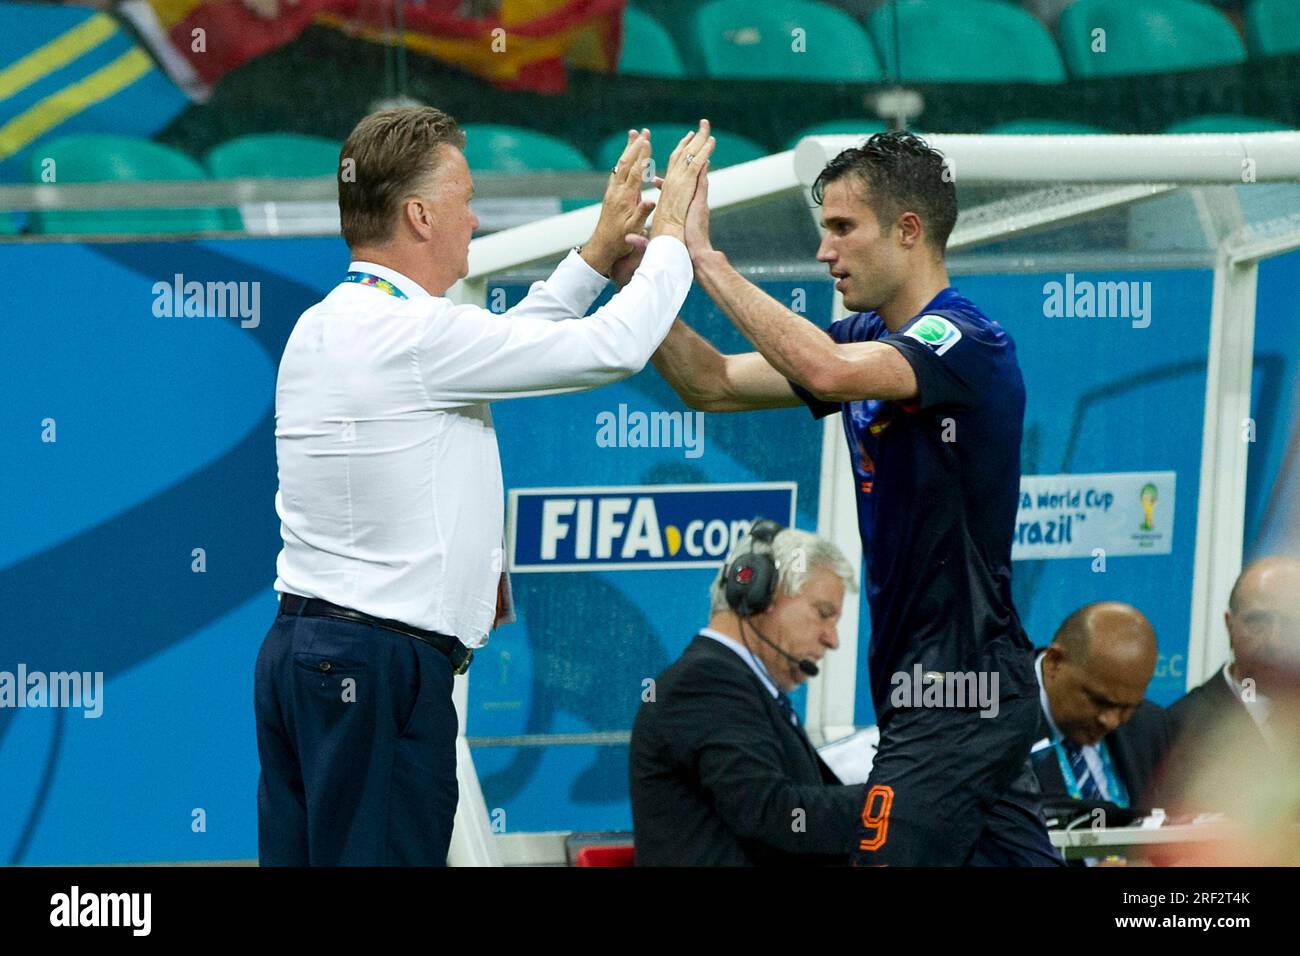 ARCHIVE PHOTO: Robin van PERSIE will be 40 years old on August 6, 2023, coach Louis VAN GAAL (NED, l.) thanks his captain, who became 'man of the match', when Robin VAN PERSIE (NED) was substituted, high fives with him; Spain (ESP) - Netherlands (NED) 1:5, preliminary round group B, game 3, on 06/13/2014 in Salvador; Soccer World Cup 2014 in Brazil from 12.06. - 07/13/2014. ? Stock Photo